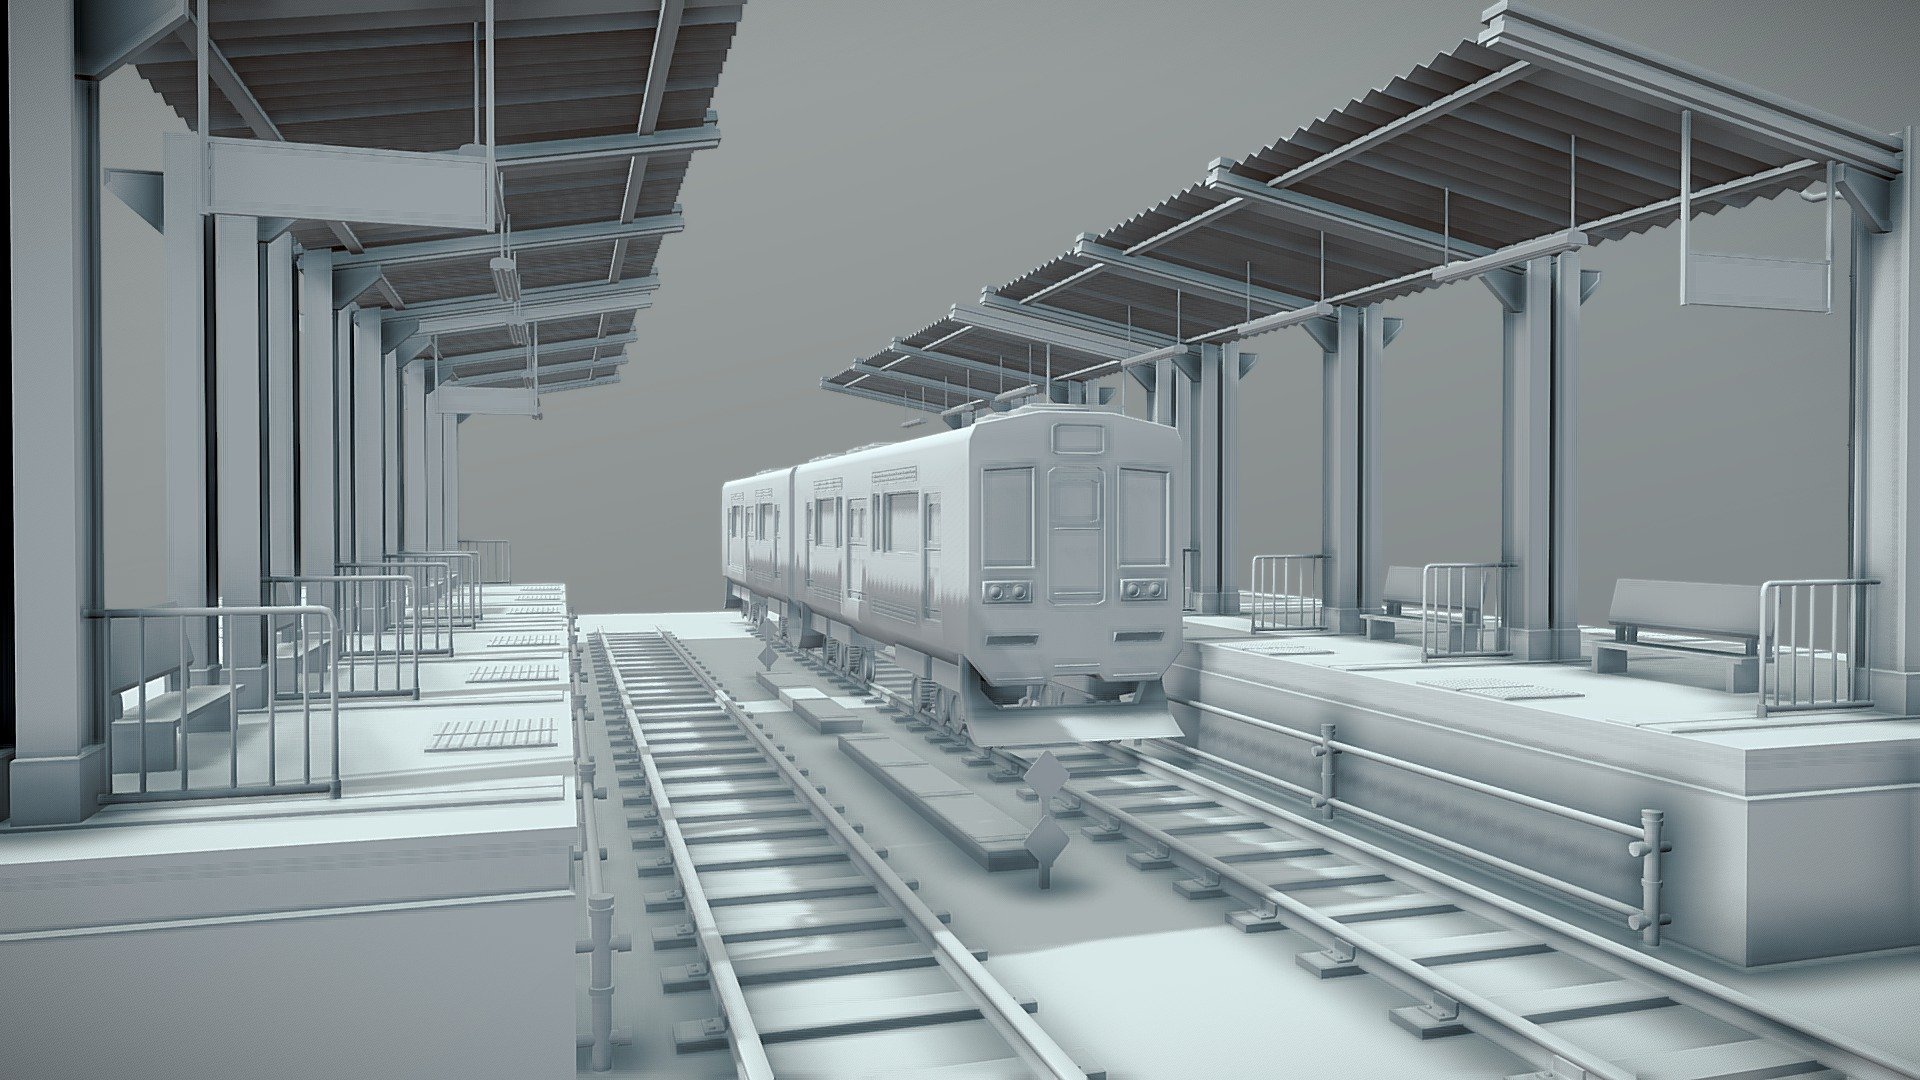 This is an untextured model of a Japanese inspired railway train and station. The model was created using Autodesk Maya. This model could be used for an Anime game, series, or Manga. it could be utilized as a 3D concept helping speed up the animation process for studios. Or could be textured and utilized as a background scene 3d model